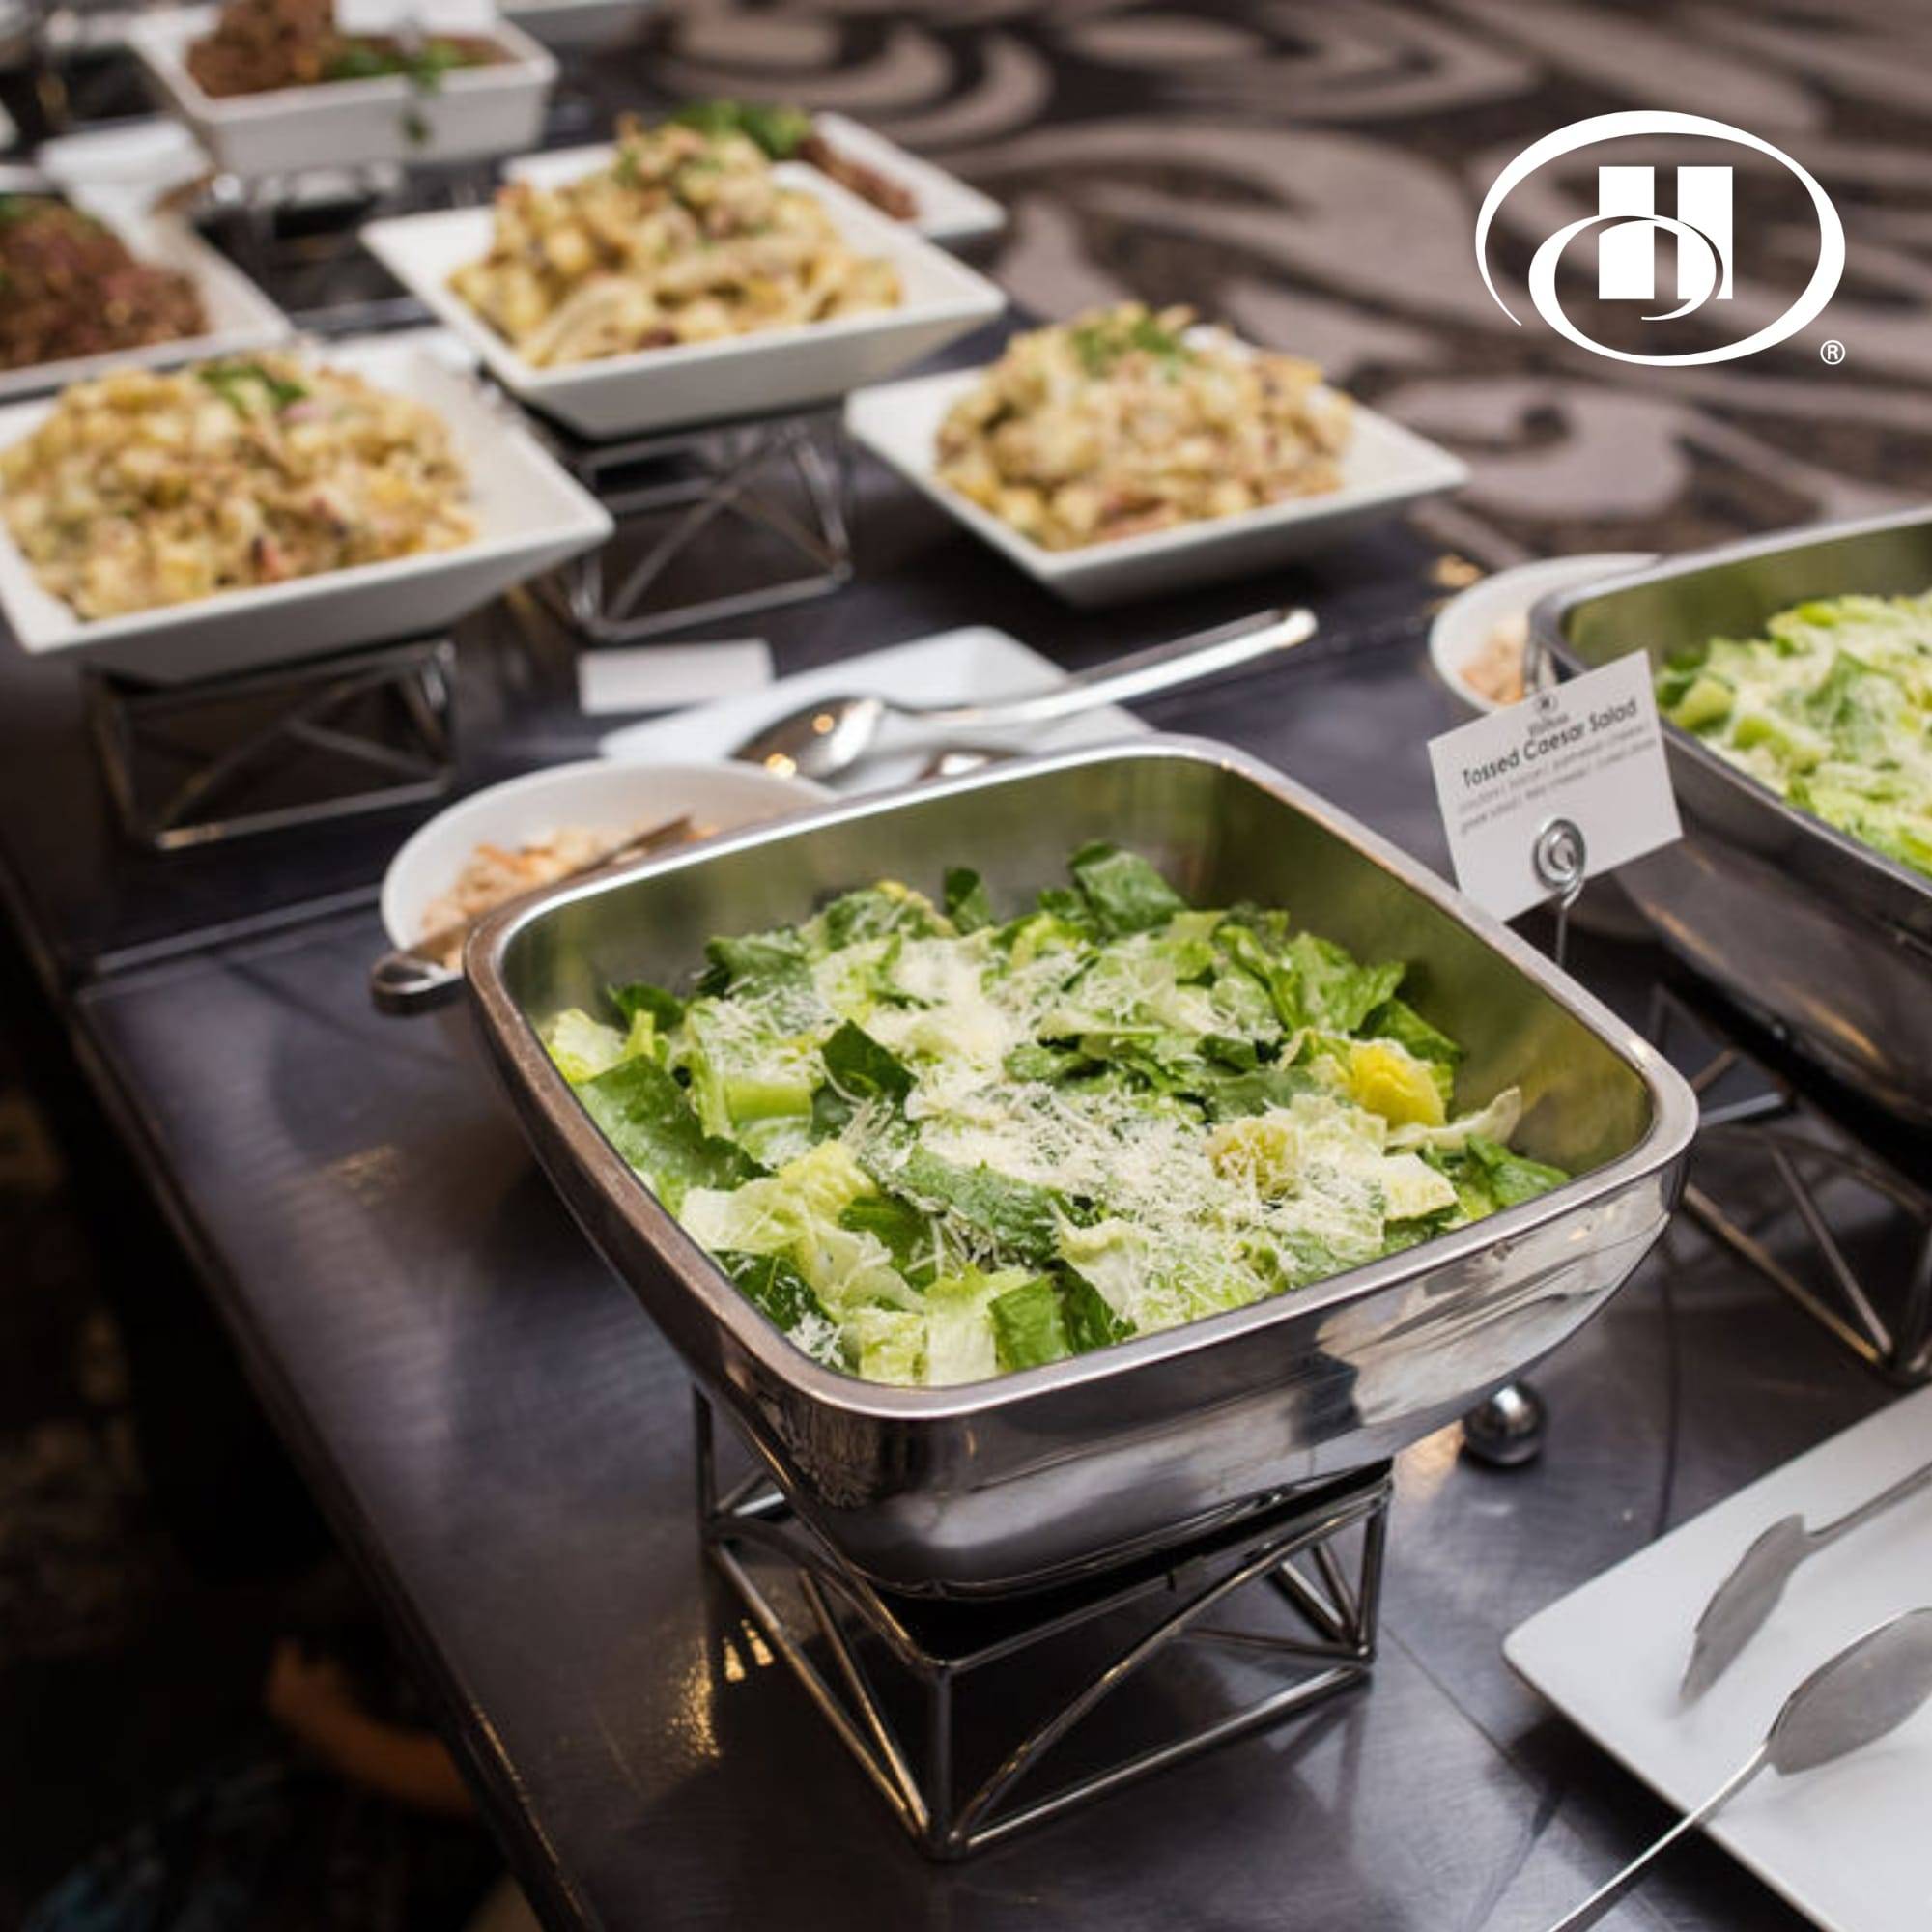 Hilton Vancouver Airport food and beverage catering menu